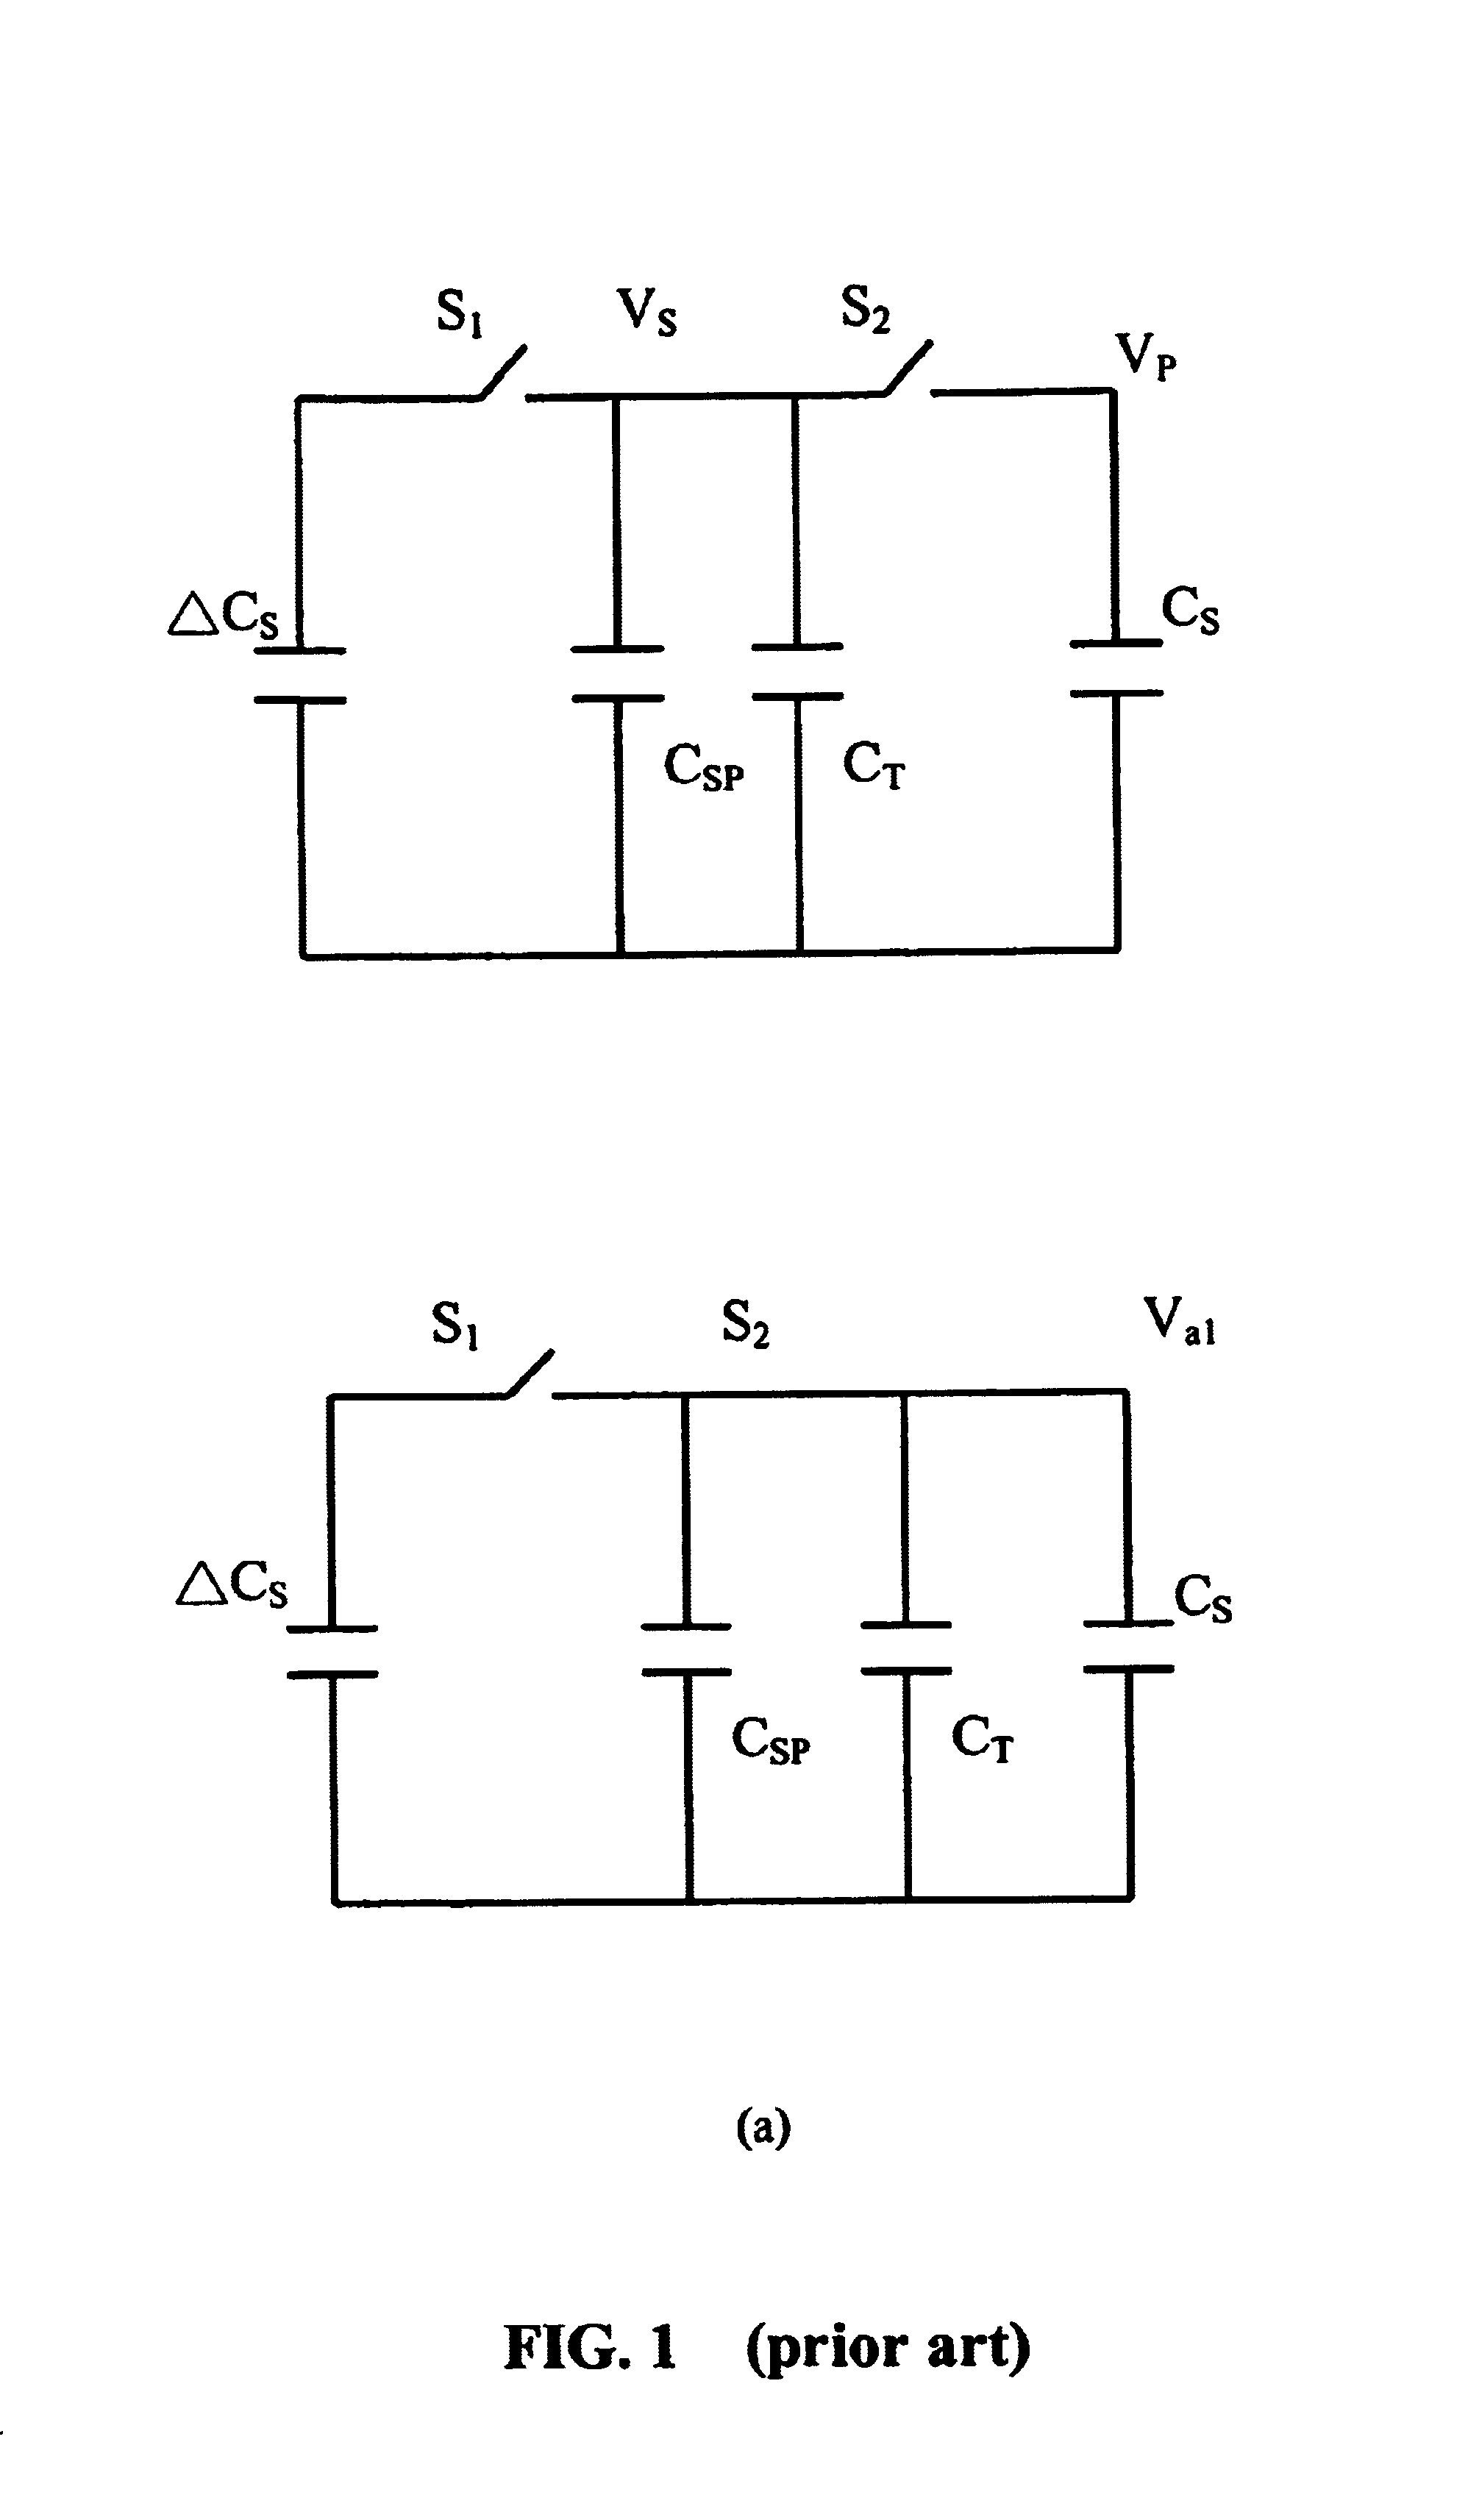 Testing apparatus and method for thin film transistor display array